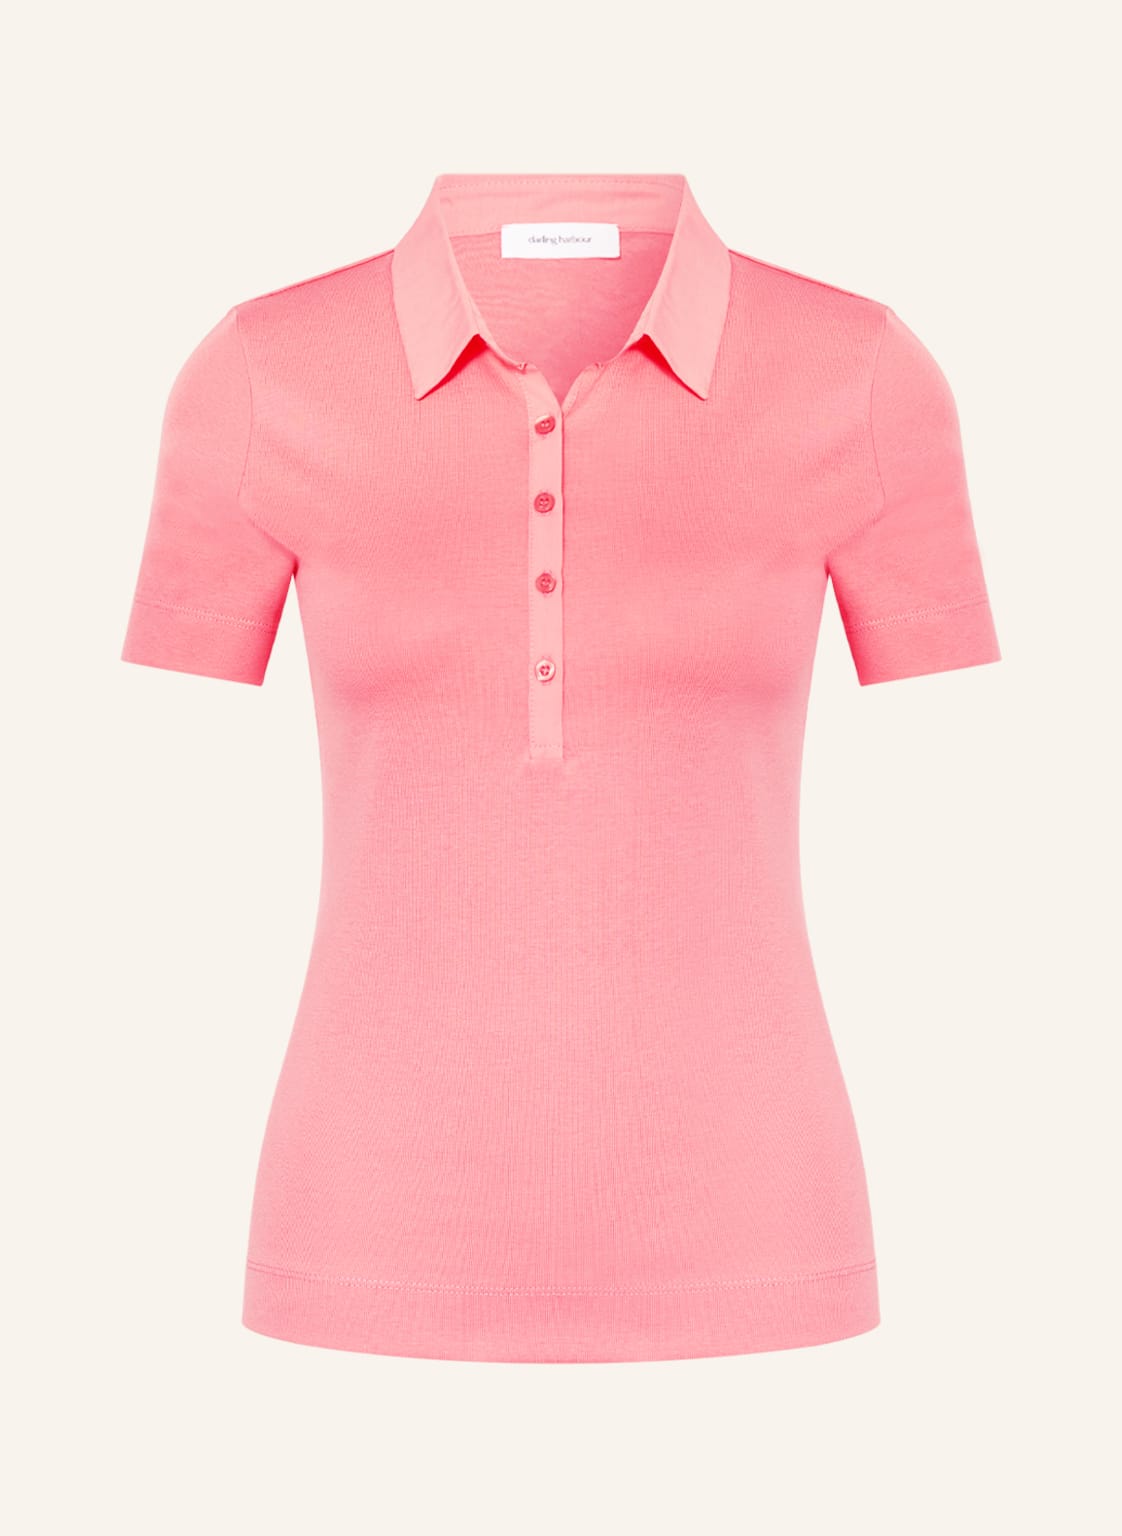 Darling Harbour Jersey-Poloshirt rot von darling harbour